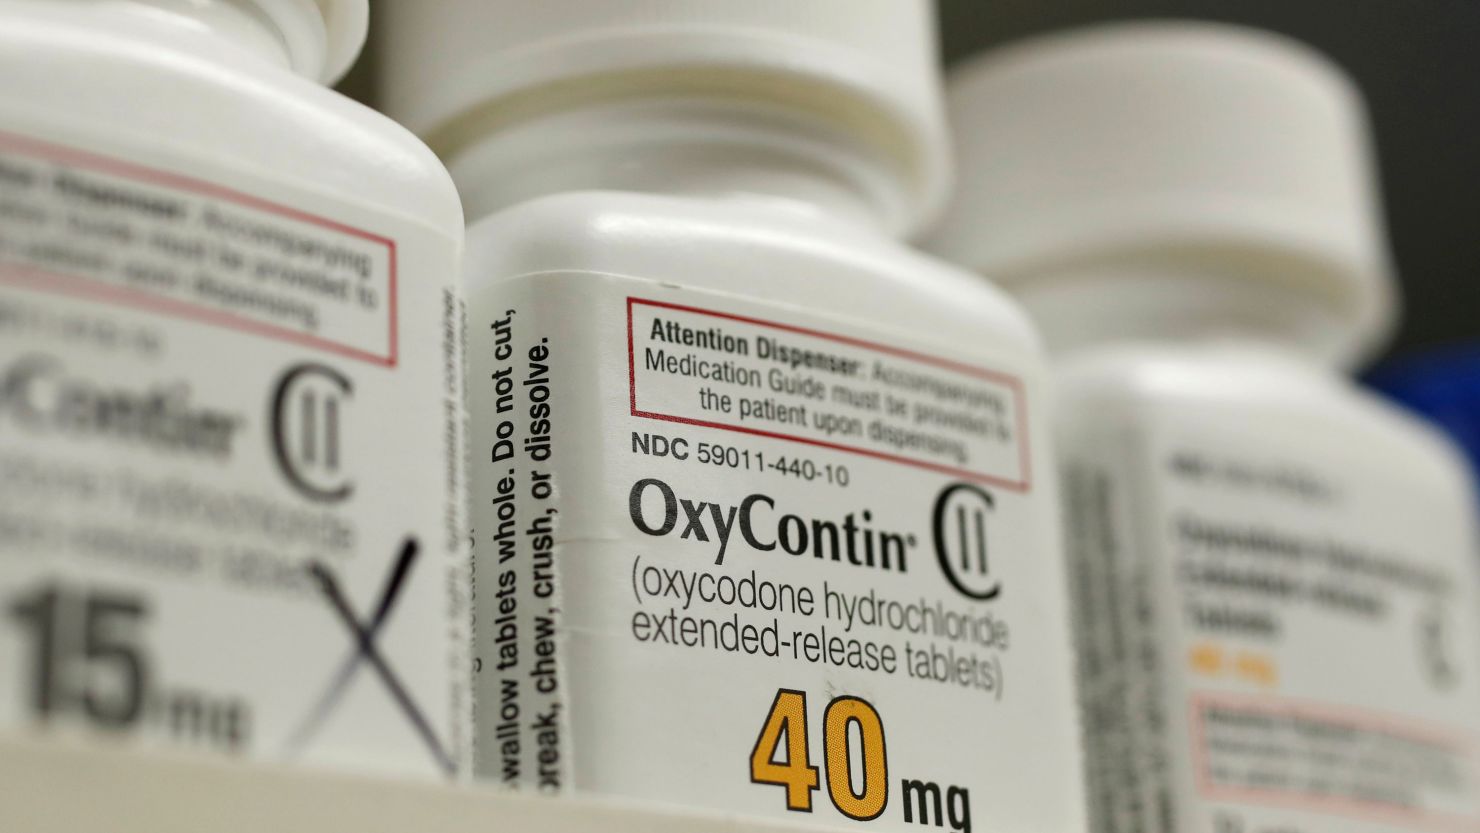 Bottles of prescription painkiller OxyContin made by Purdue Pharma. REUTERS/George Frey